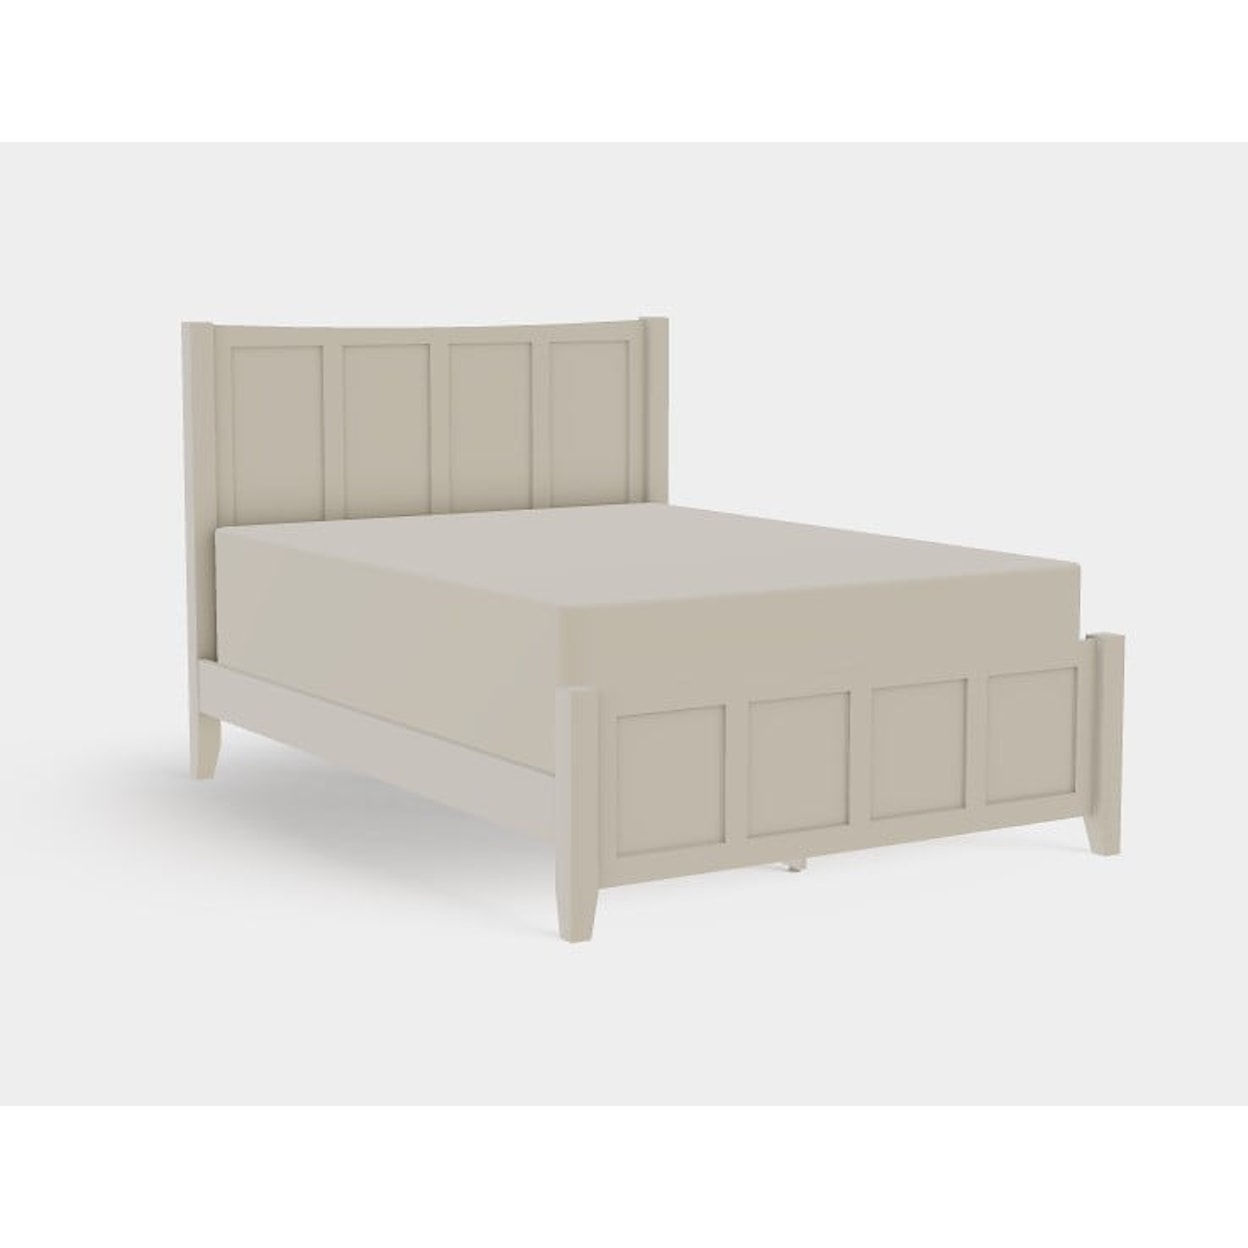 Mavin Atwood Group Atwood Queen Low Footboard Panel Bed